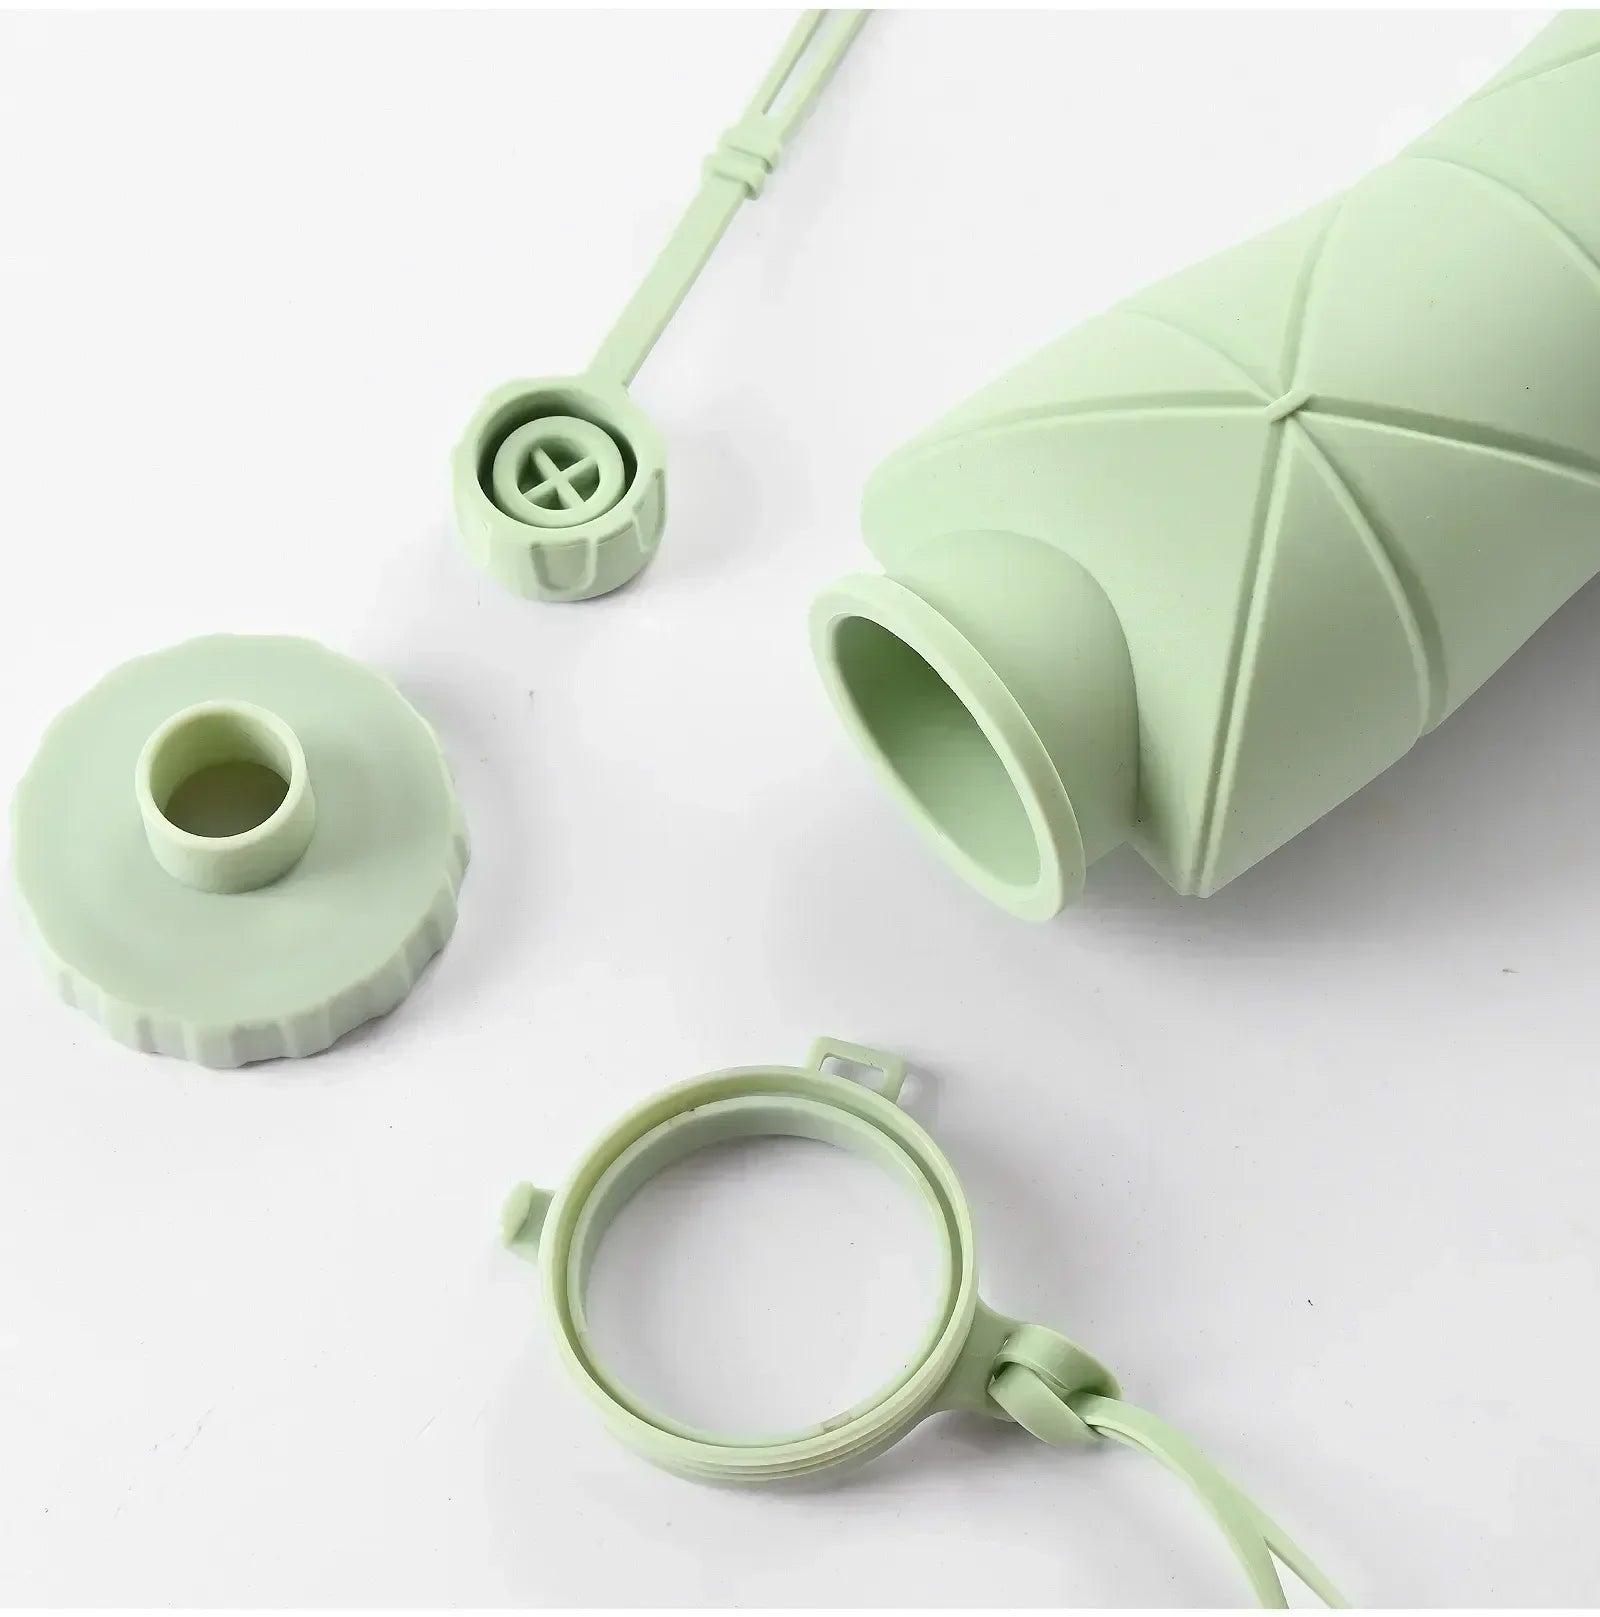 Silicone Foldable Water Bottle For Hydration On The Go - OnTheGo Drinkware